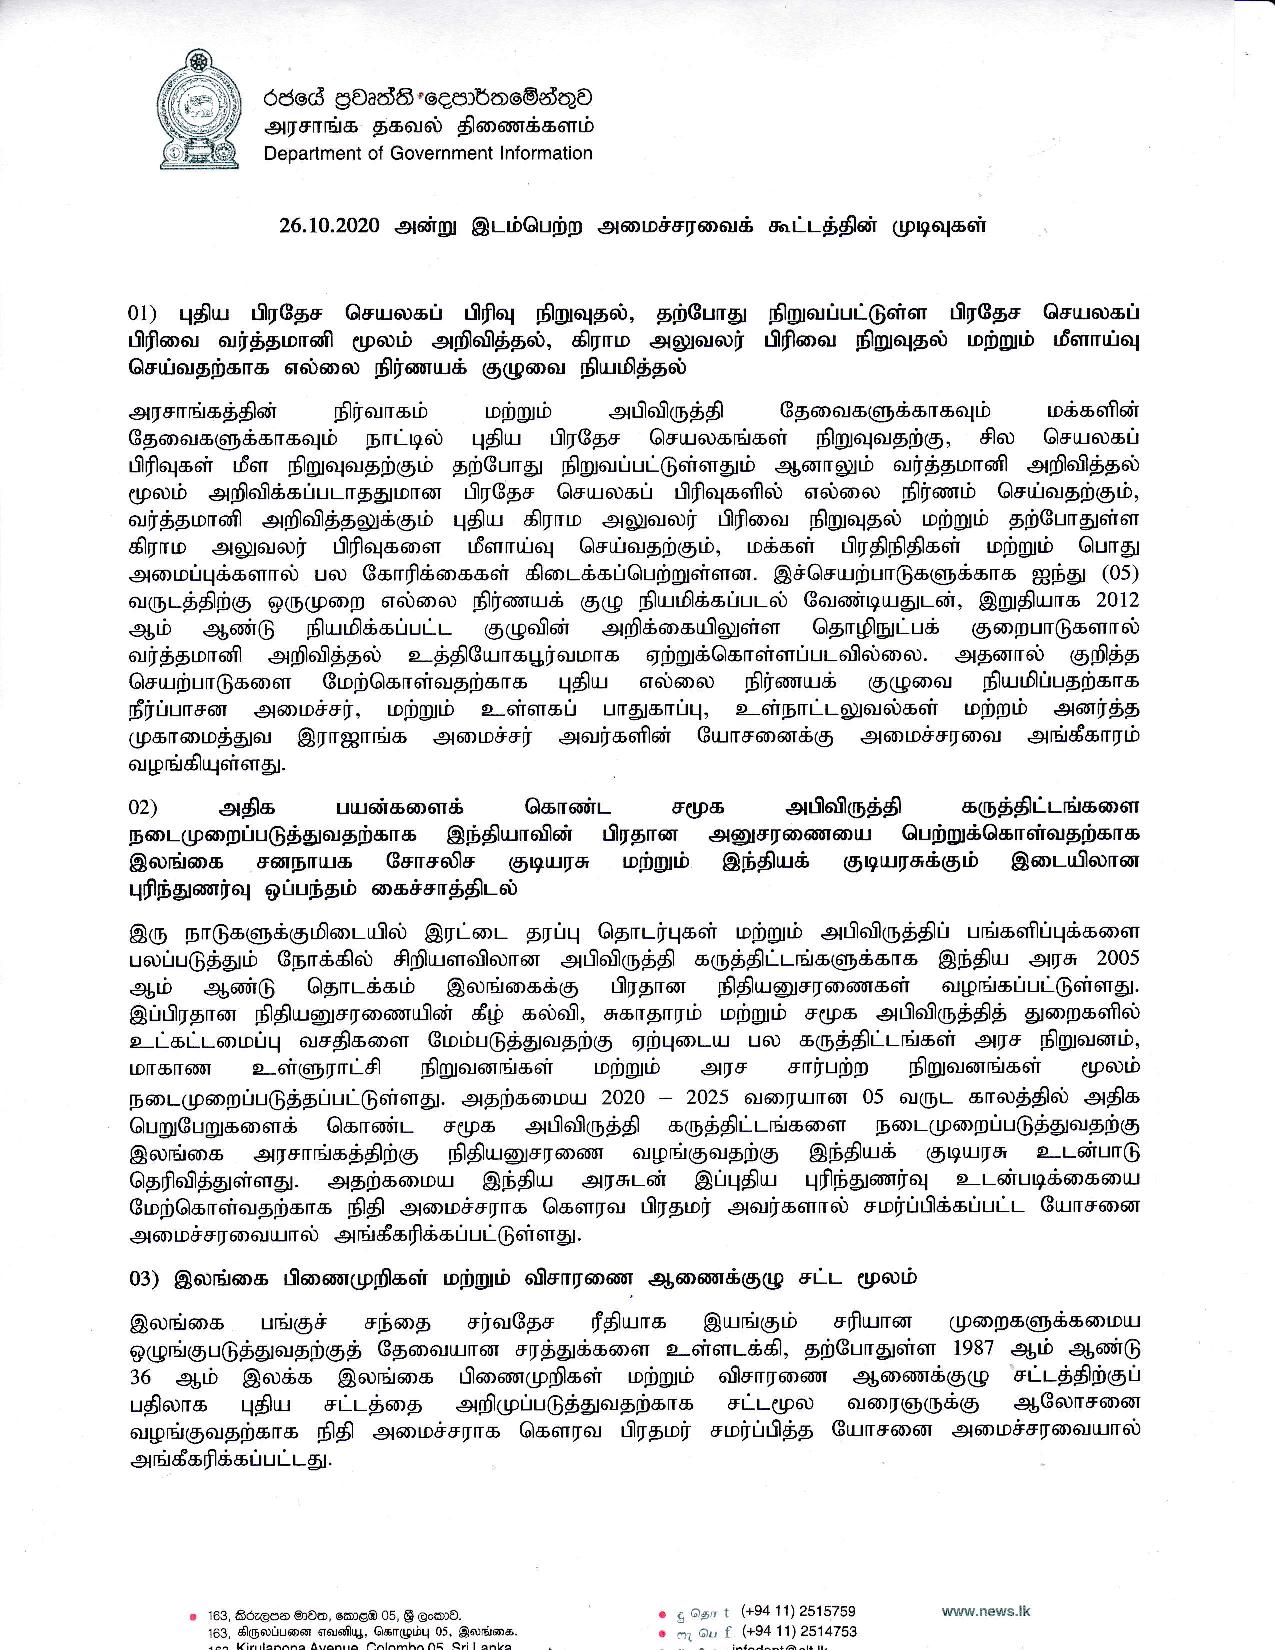 Cabinet Decision on 26.10.2020 Tamil page 001